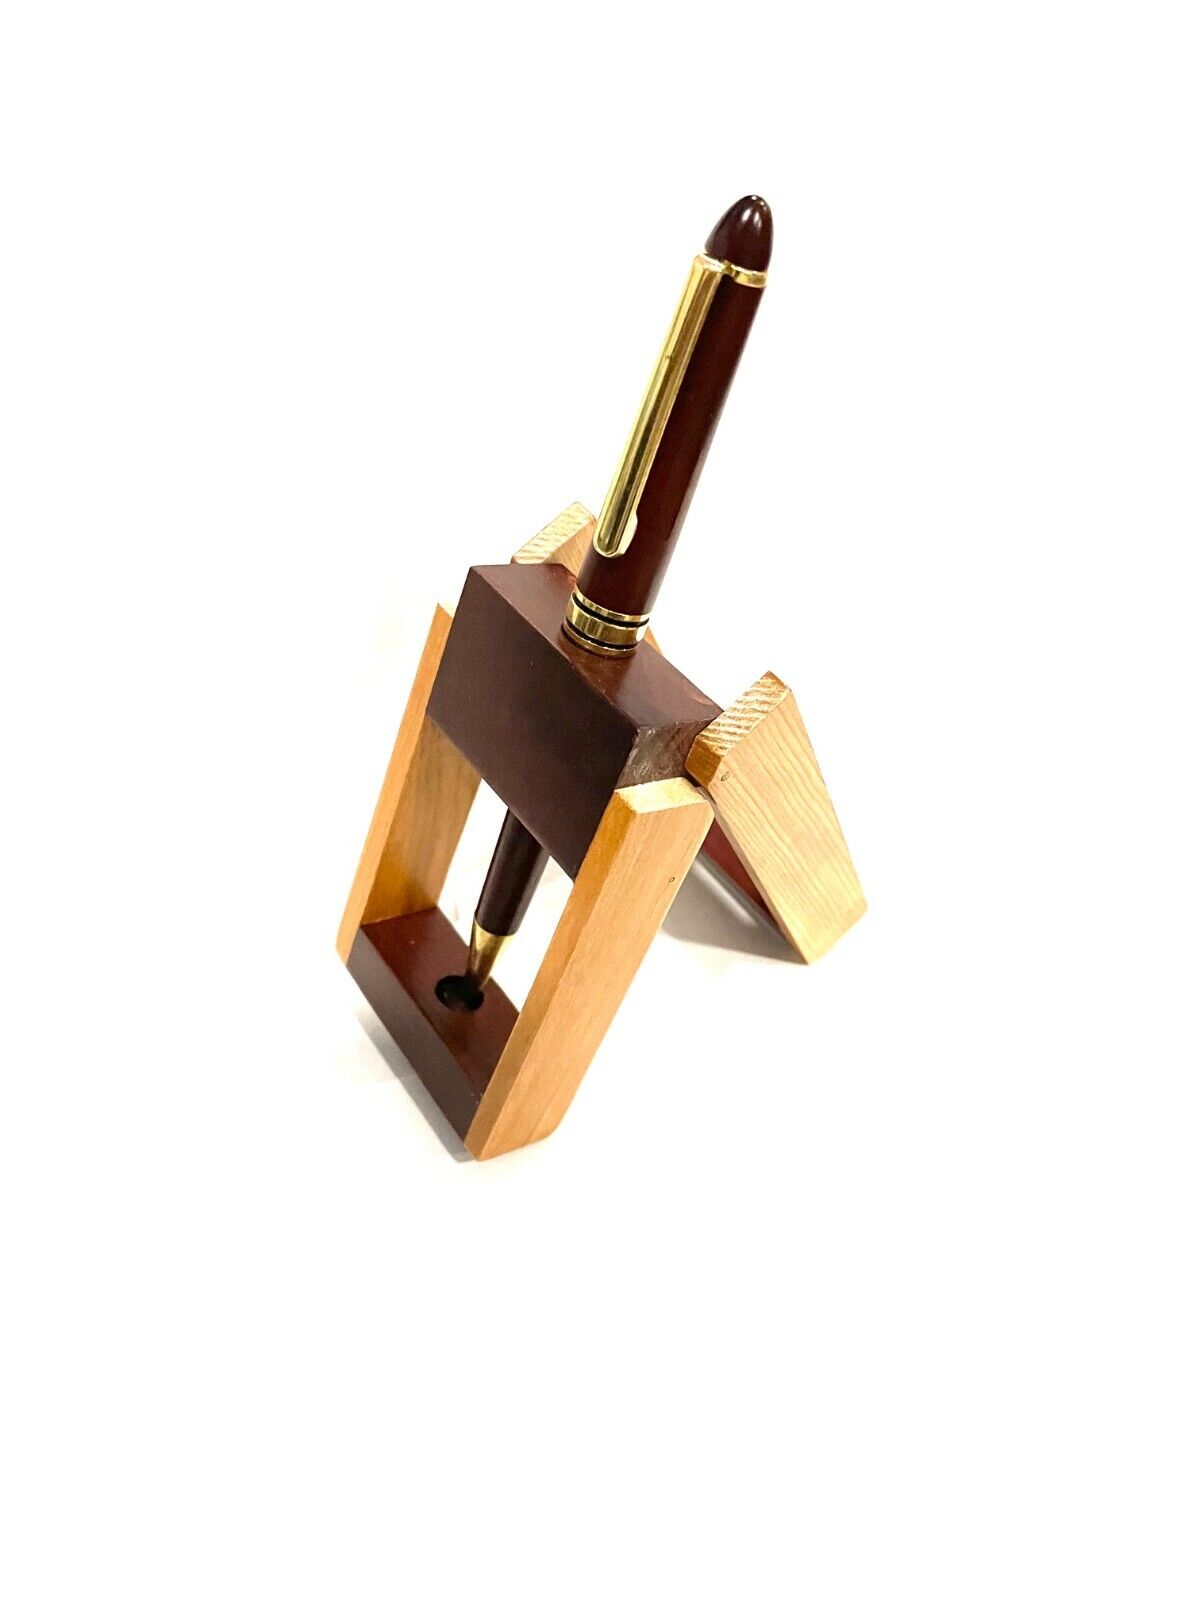 Luxury Rosewood Ballpoint Pen With Gold Tone Accents And Wooden Stand